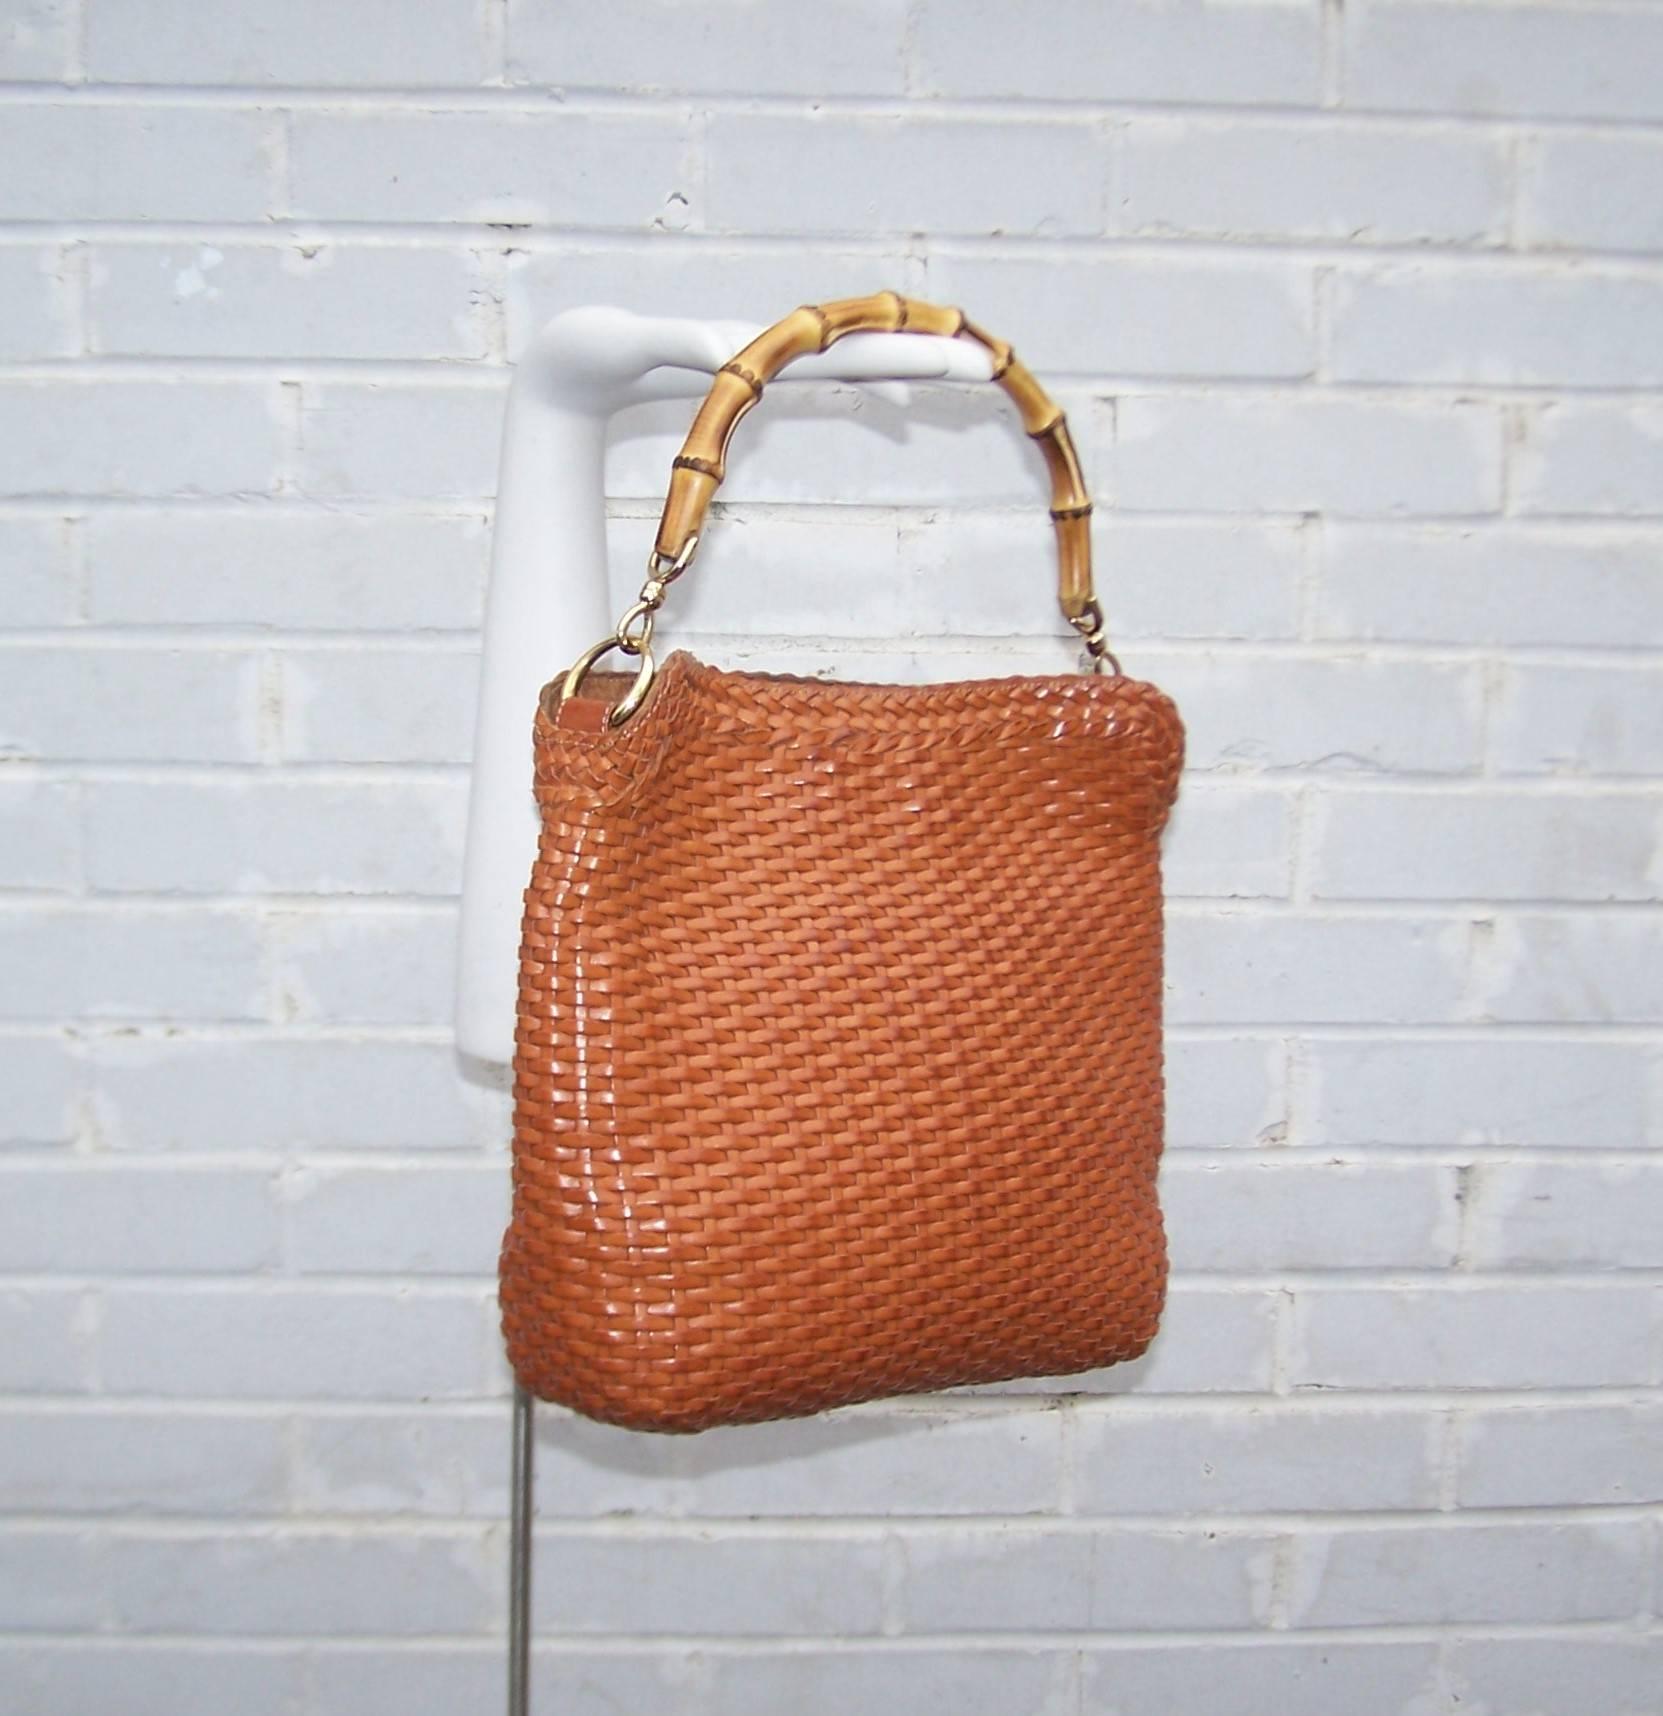 Women's C.1990 Gucci Cognac Woven Leather Handbag With Bamboo Handle